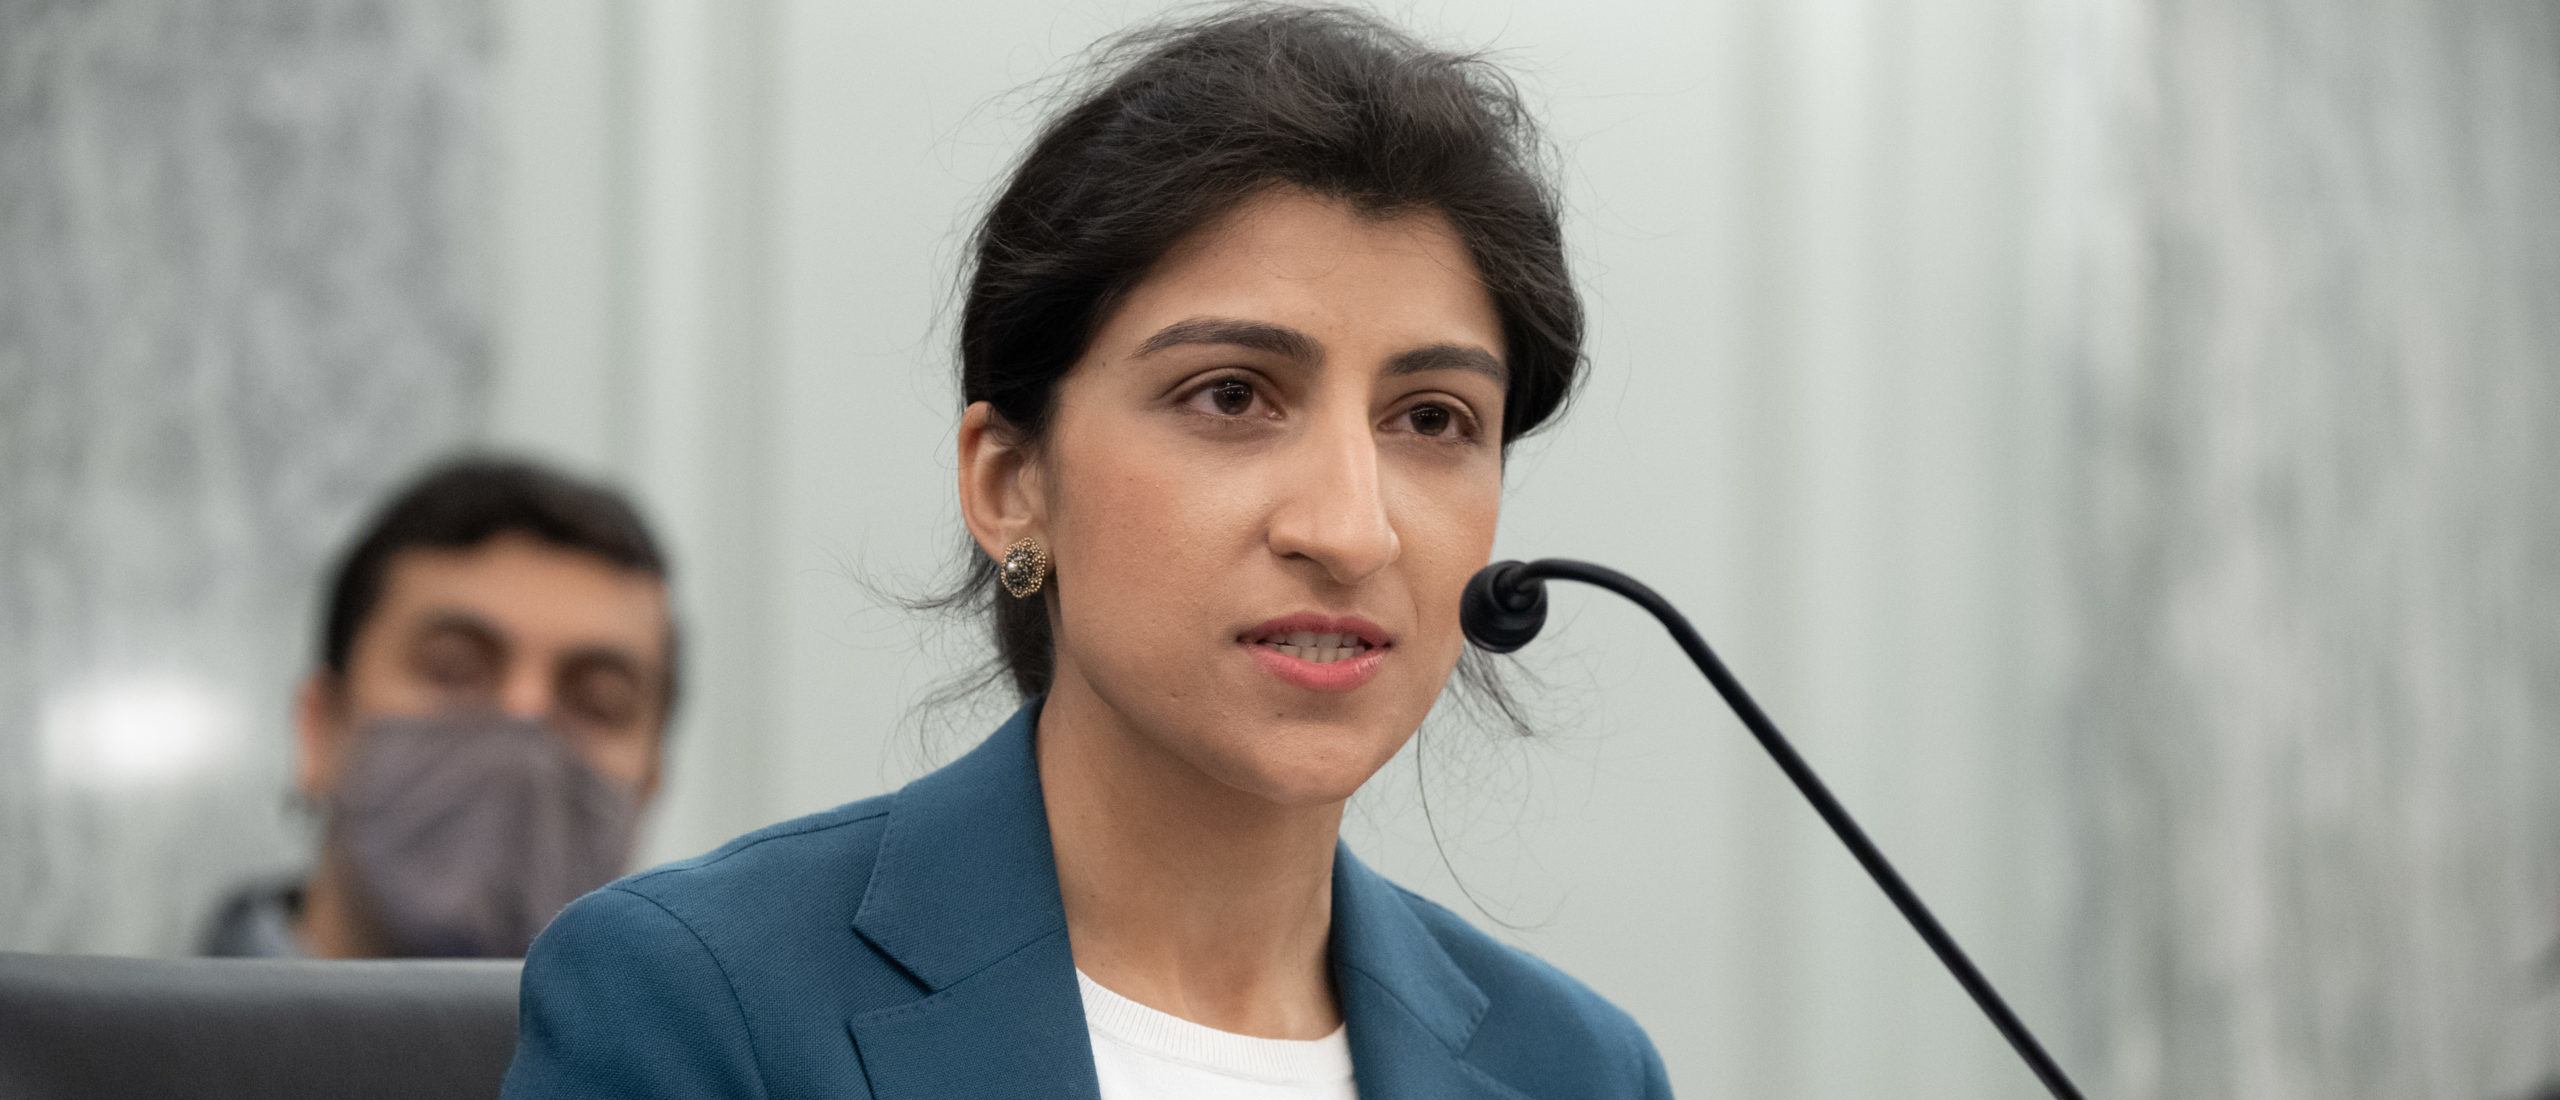 Lina Khan speaks during her confirmation hearing in April. (Saul Loeb-Pool/Getty Images)